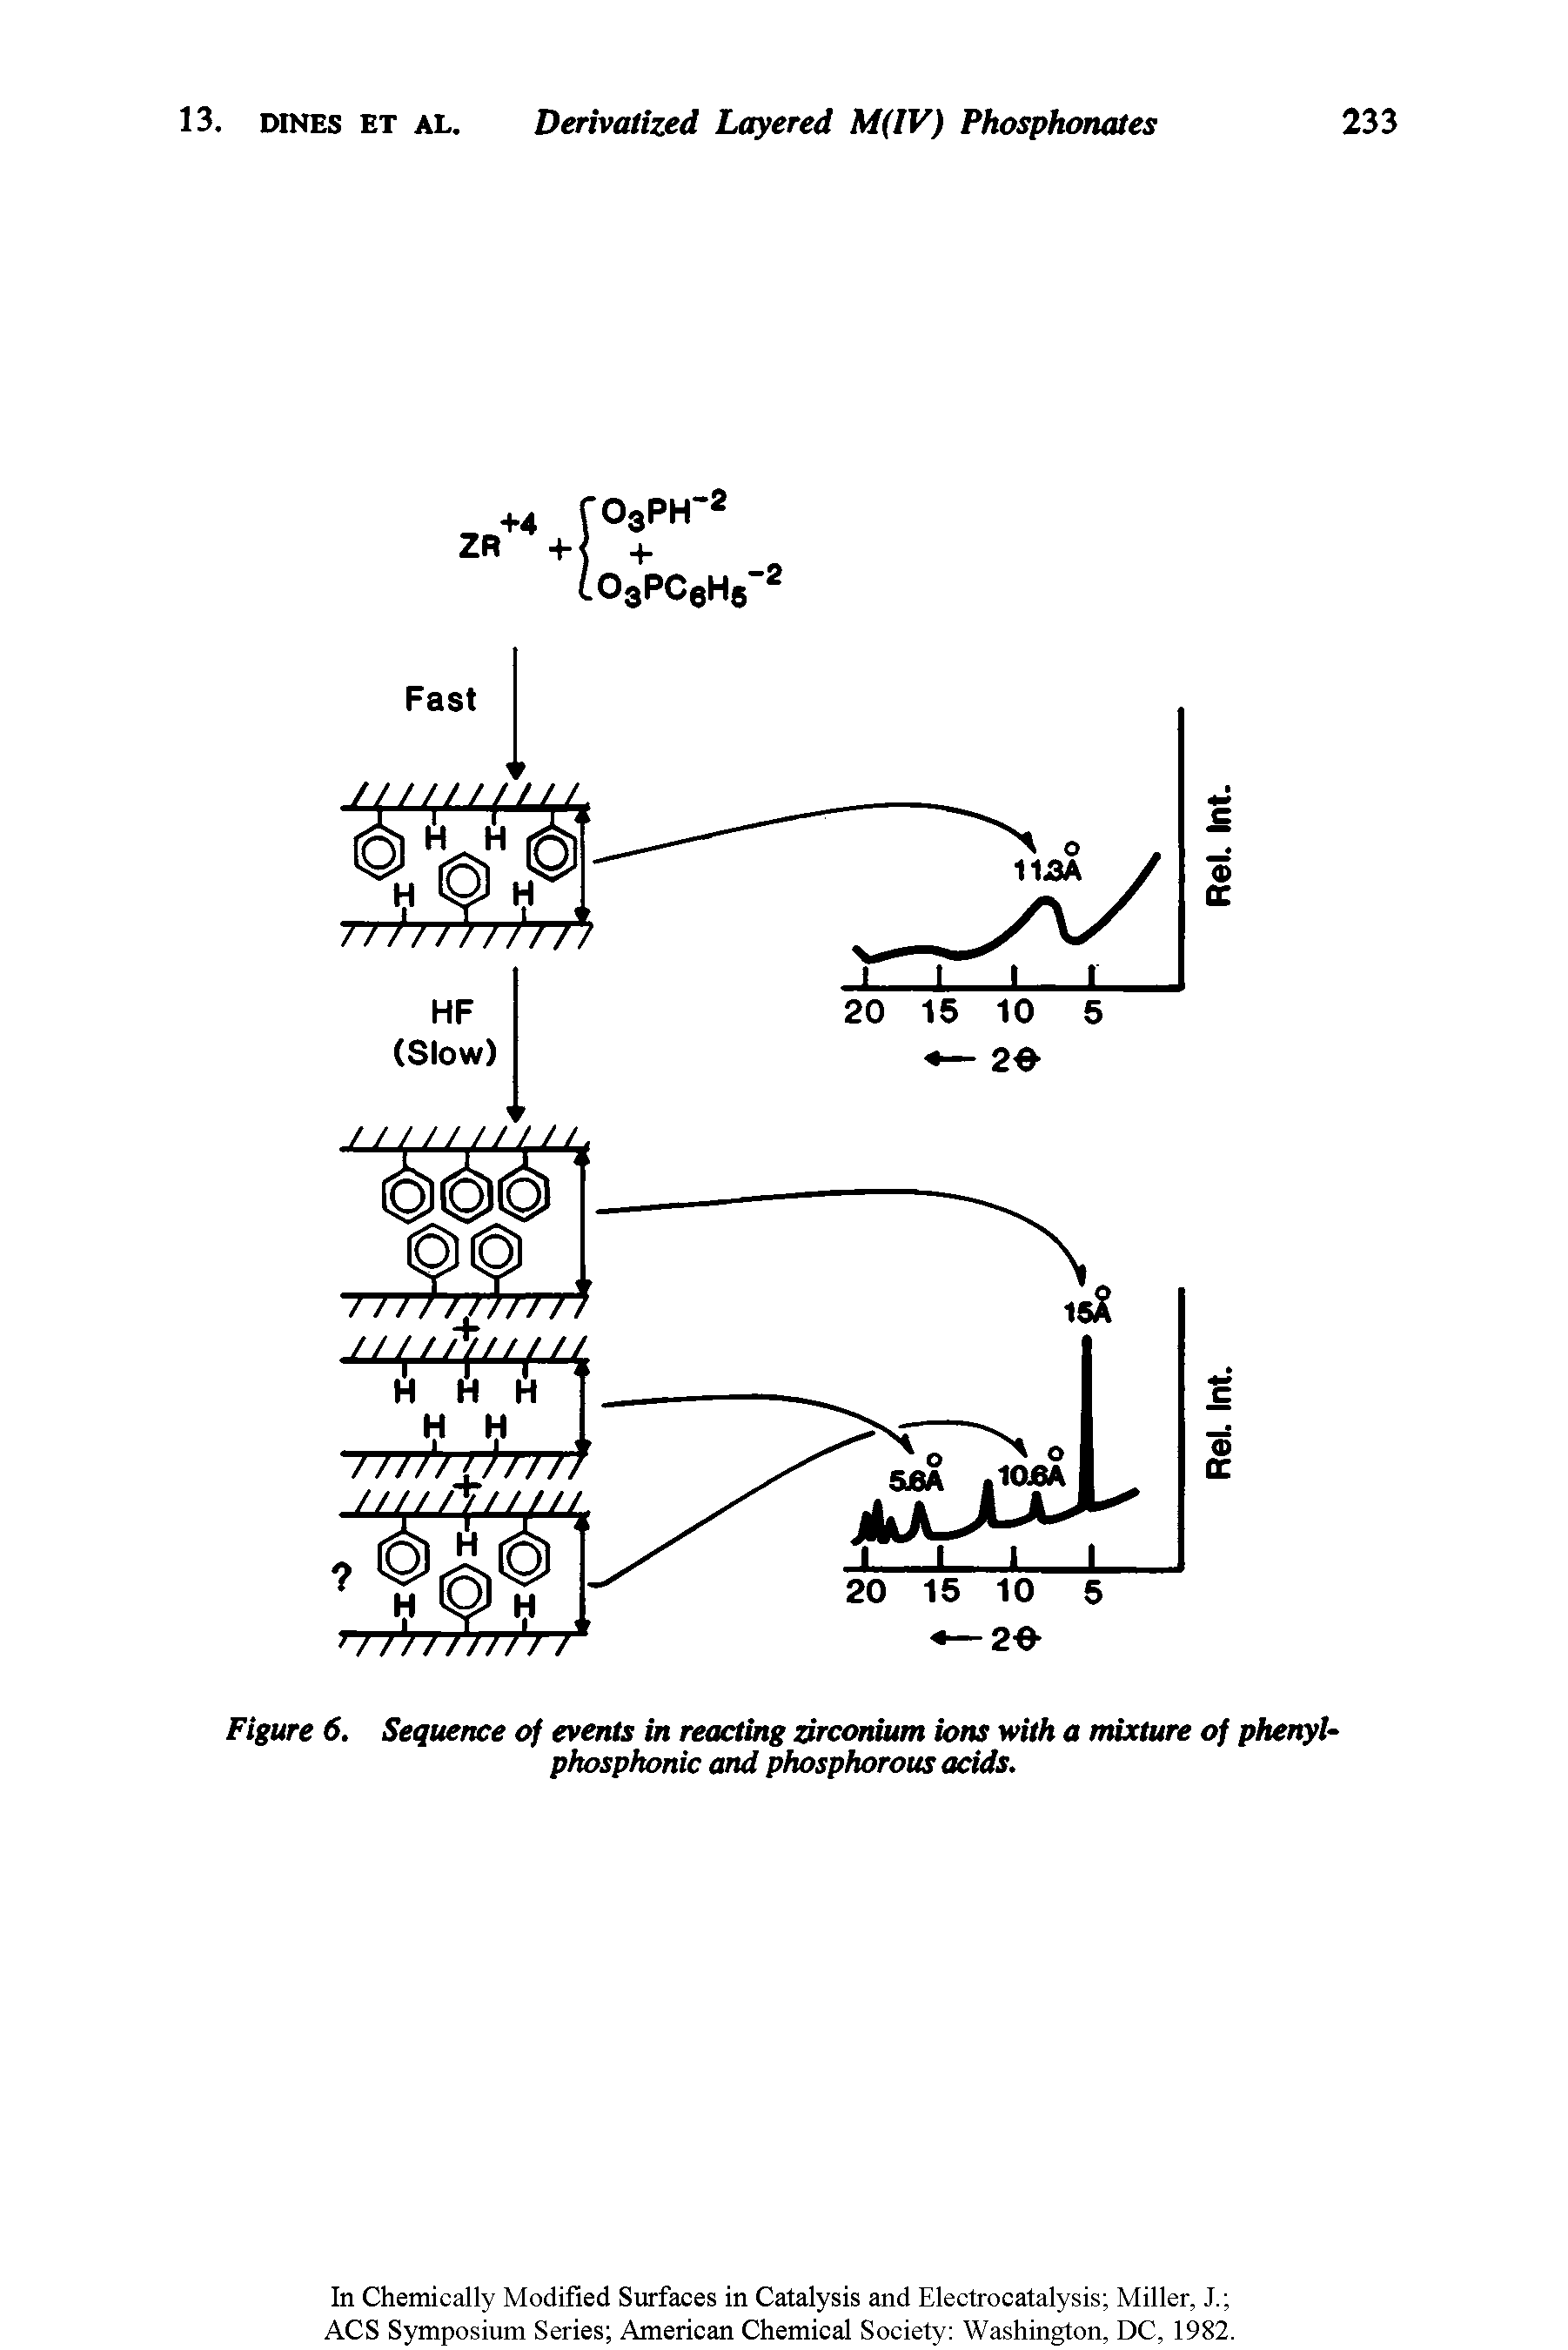 Figure 6. Sequence of events in reacting zirconium ions with a mixture of phenyl-phosphonic and phosphorous acids.